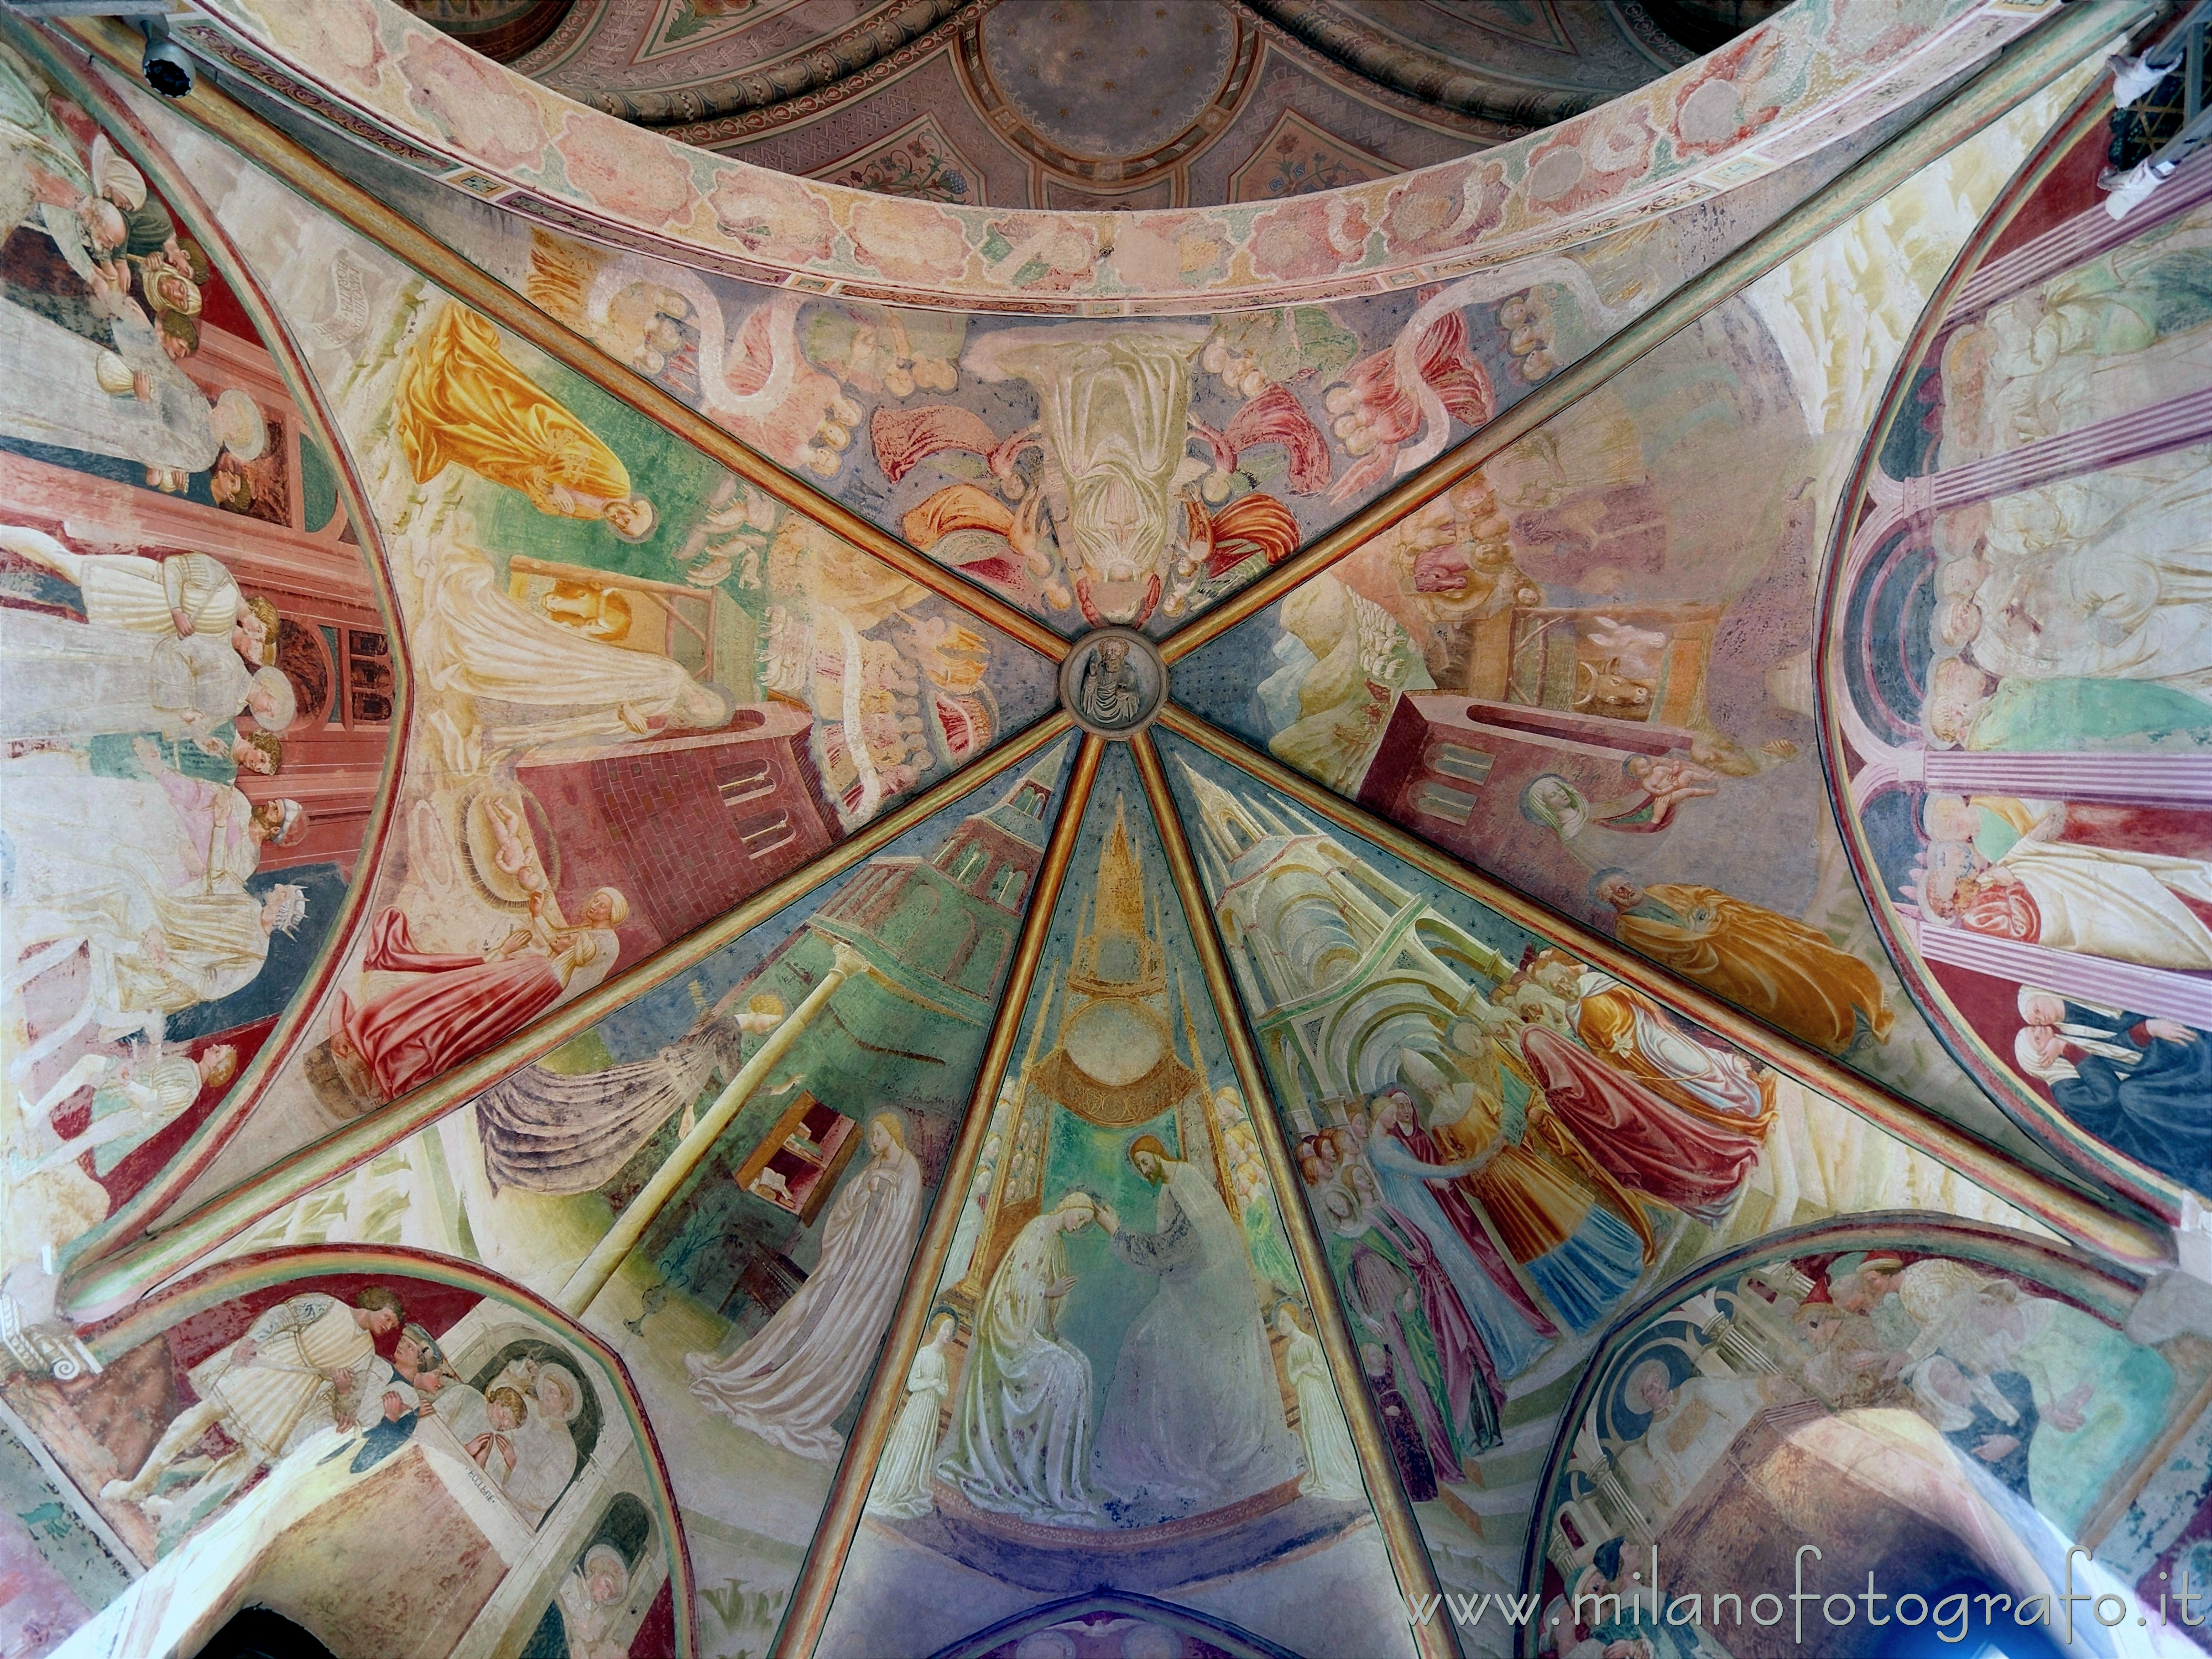 Castiglione Olona (Varese, Italy): Vault of the apse of the Collegiate Church of Saints Stephen and Lawrence frescoed by Masolino da Panicale - Castiglione Olona (Varese, Italy)